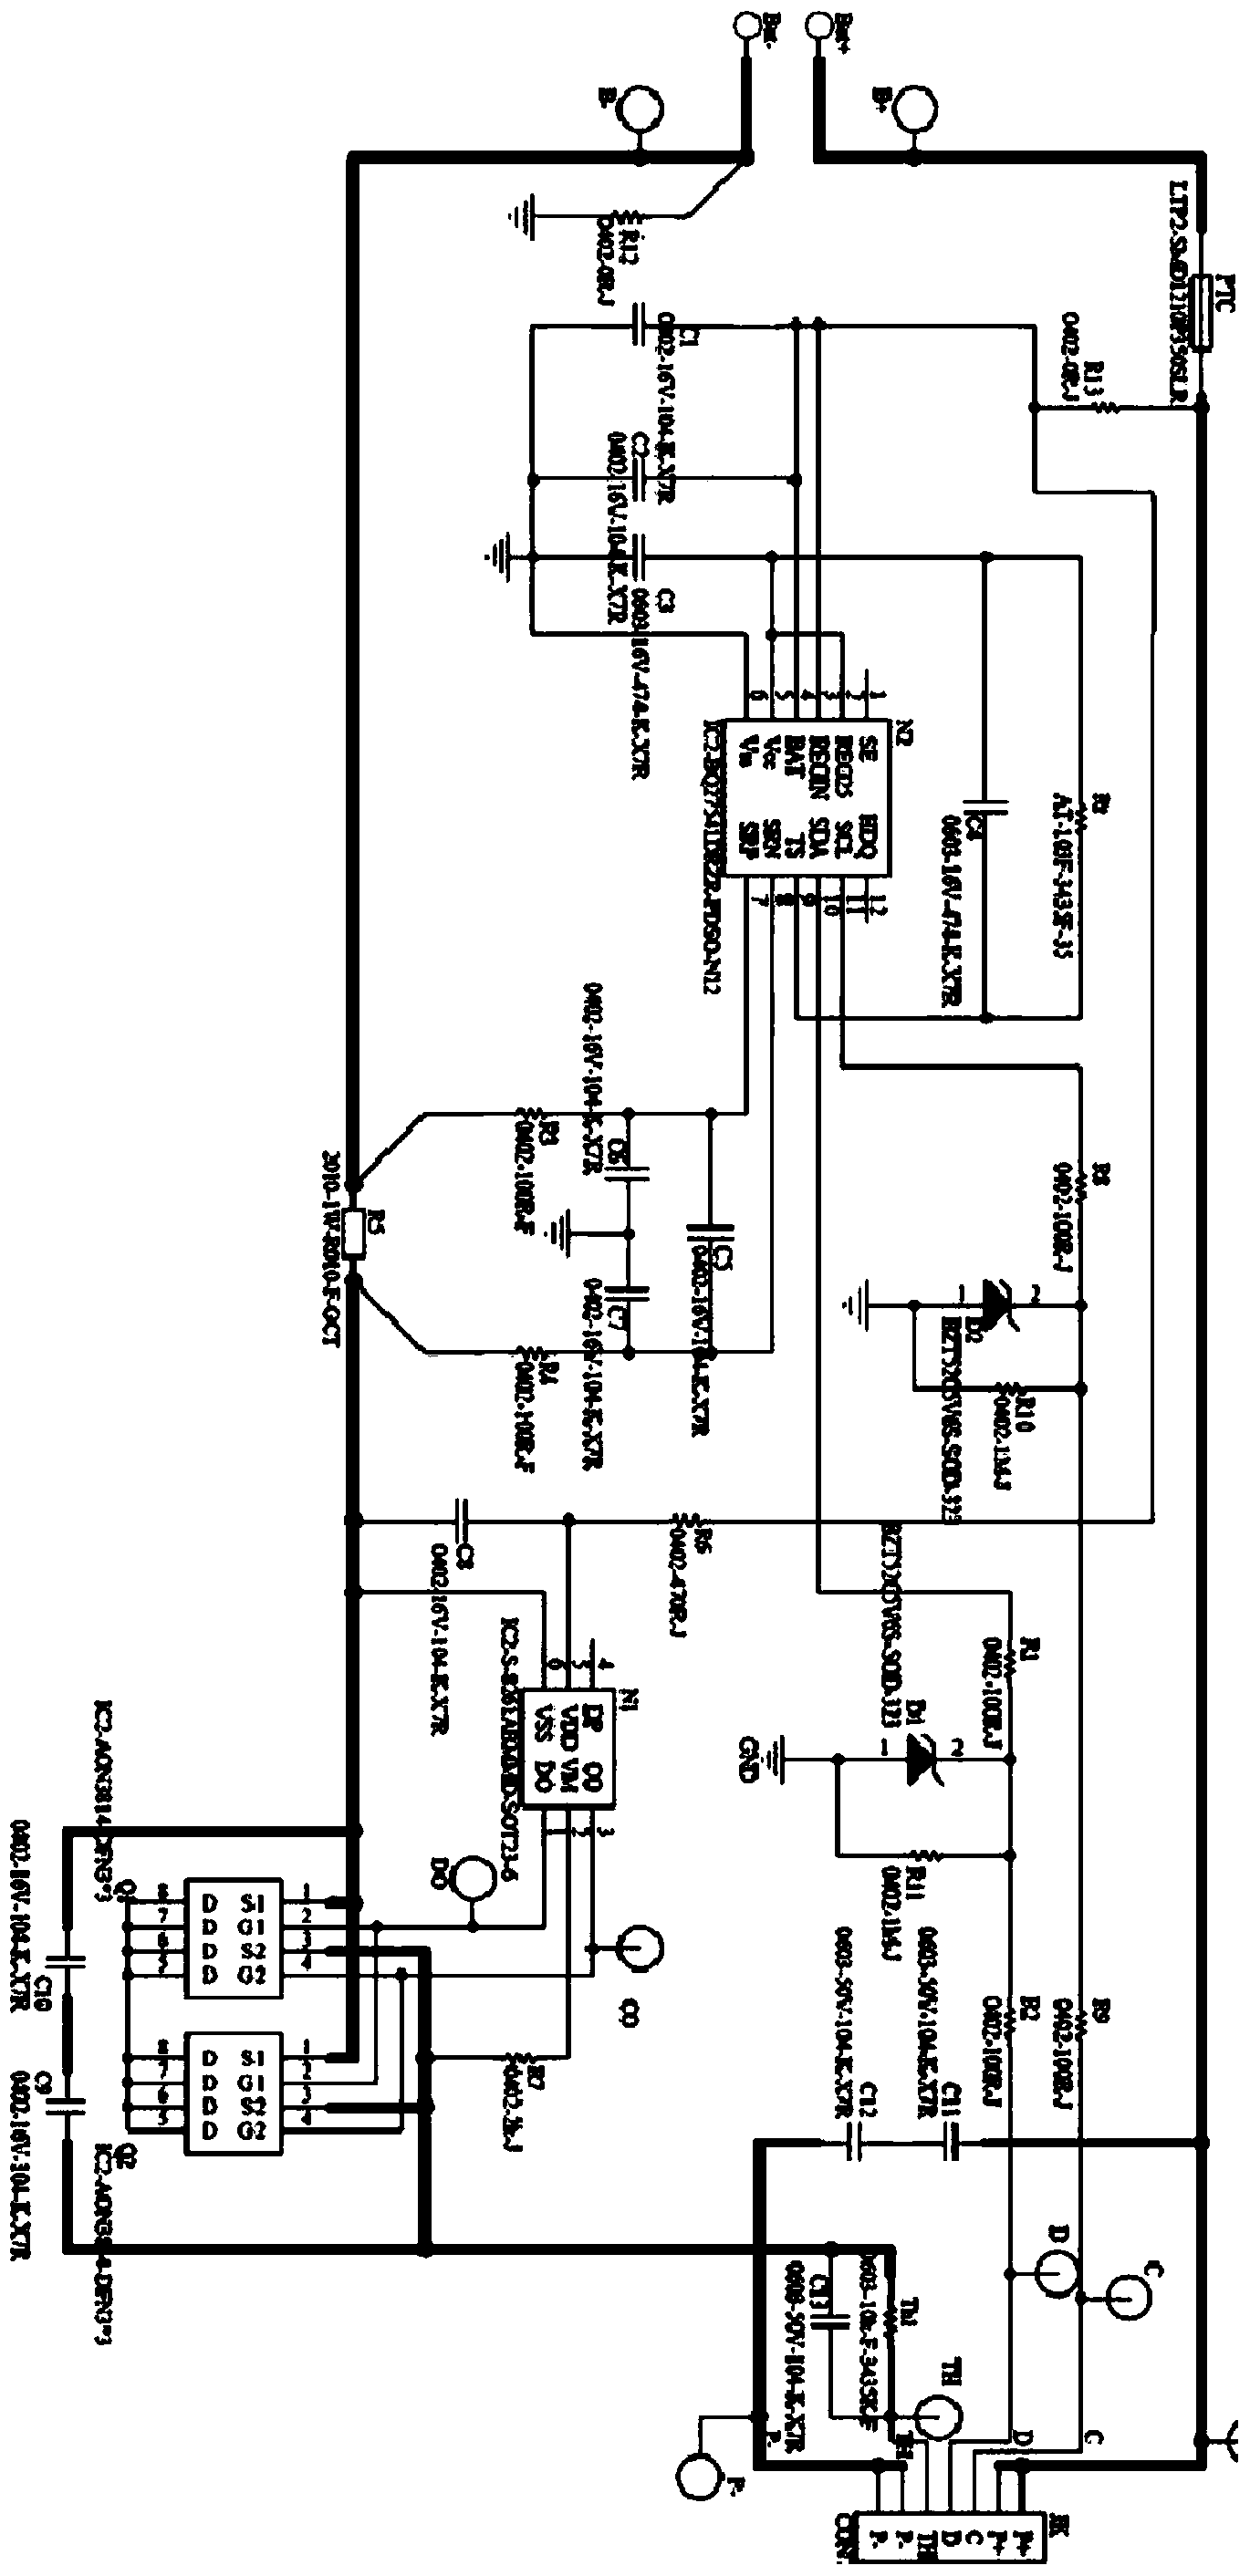 Lithium battery protection board circuit based on zero-ohm resistance element